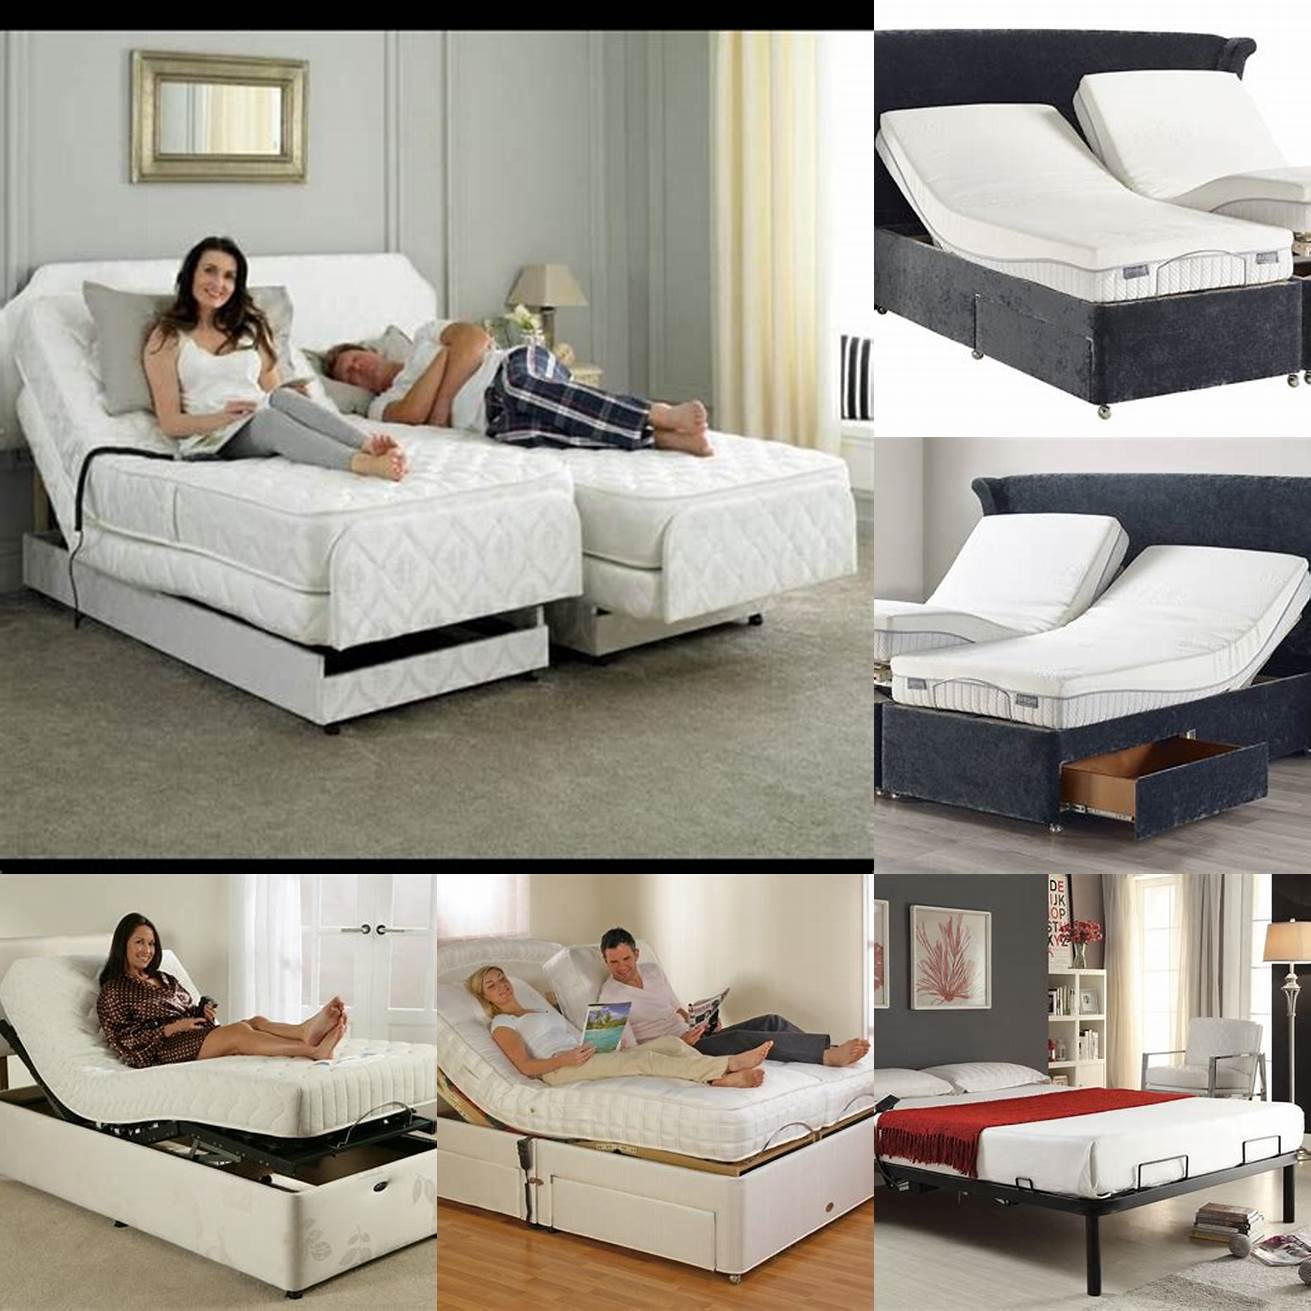 Image of a motorized king size bed